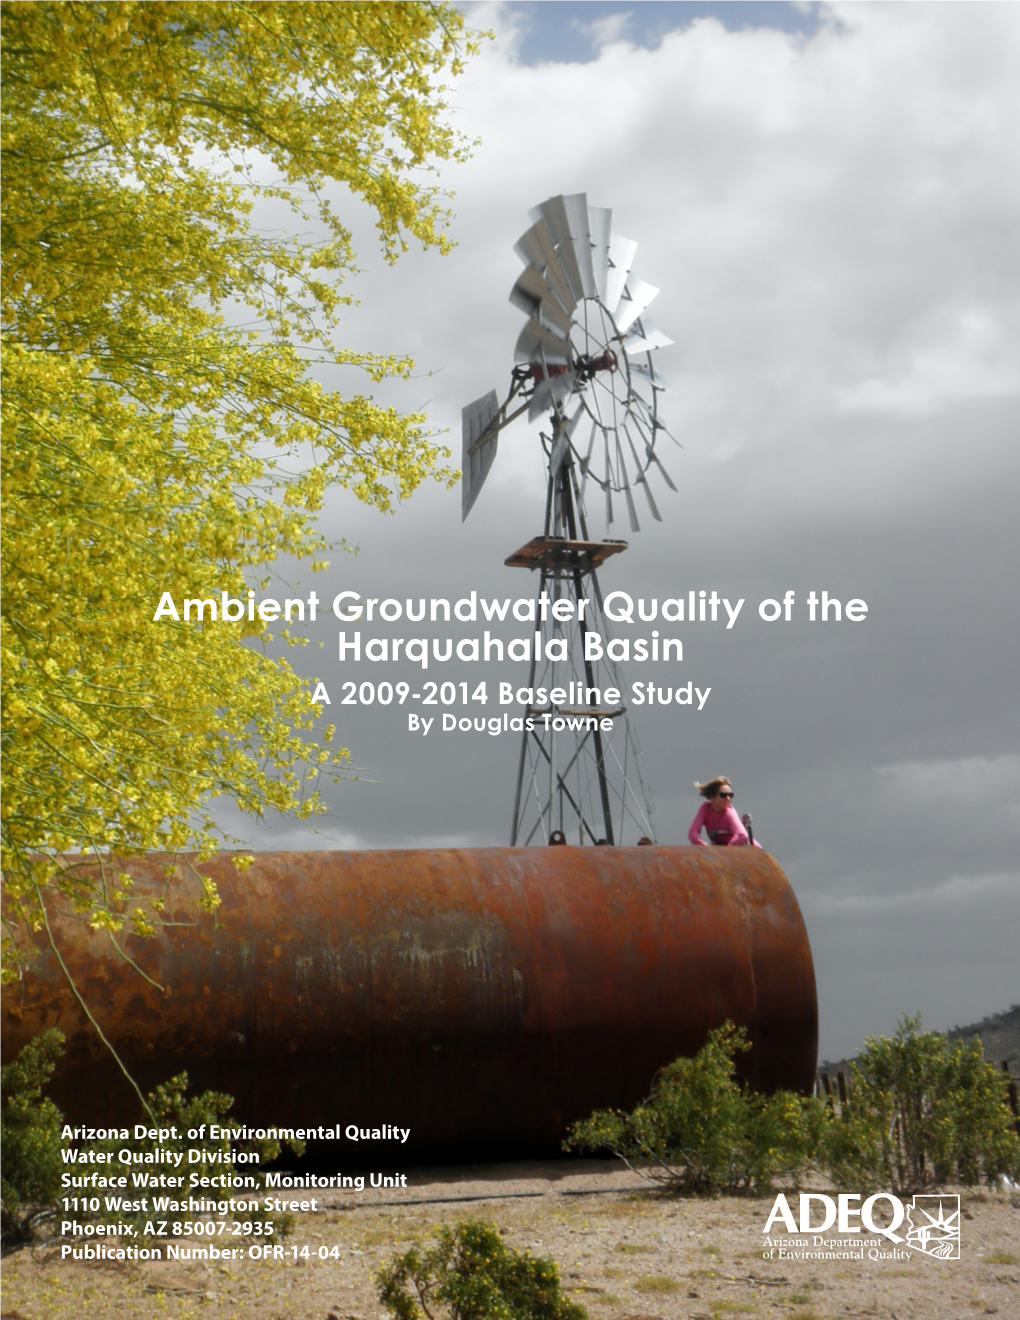 Ambient Groundwater Quality of the Harquahala Basin a 2009-2014 Baseline Study by Douglas Towne